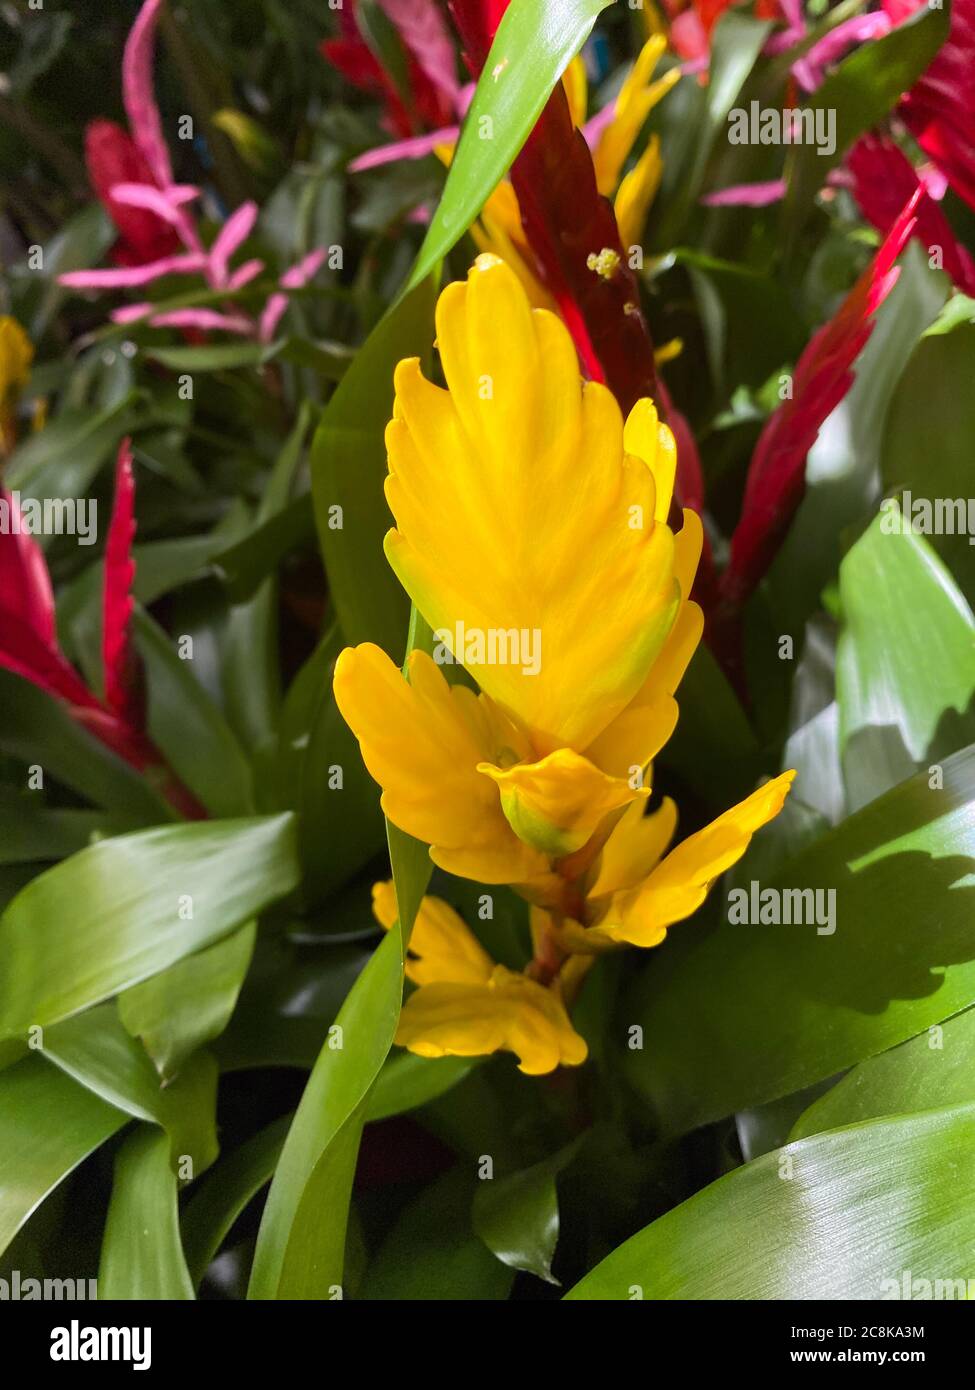 Closeup of isolated tropical plant (vriesea cultivar) with yellow red blossom and green leaves Stock Photo